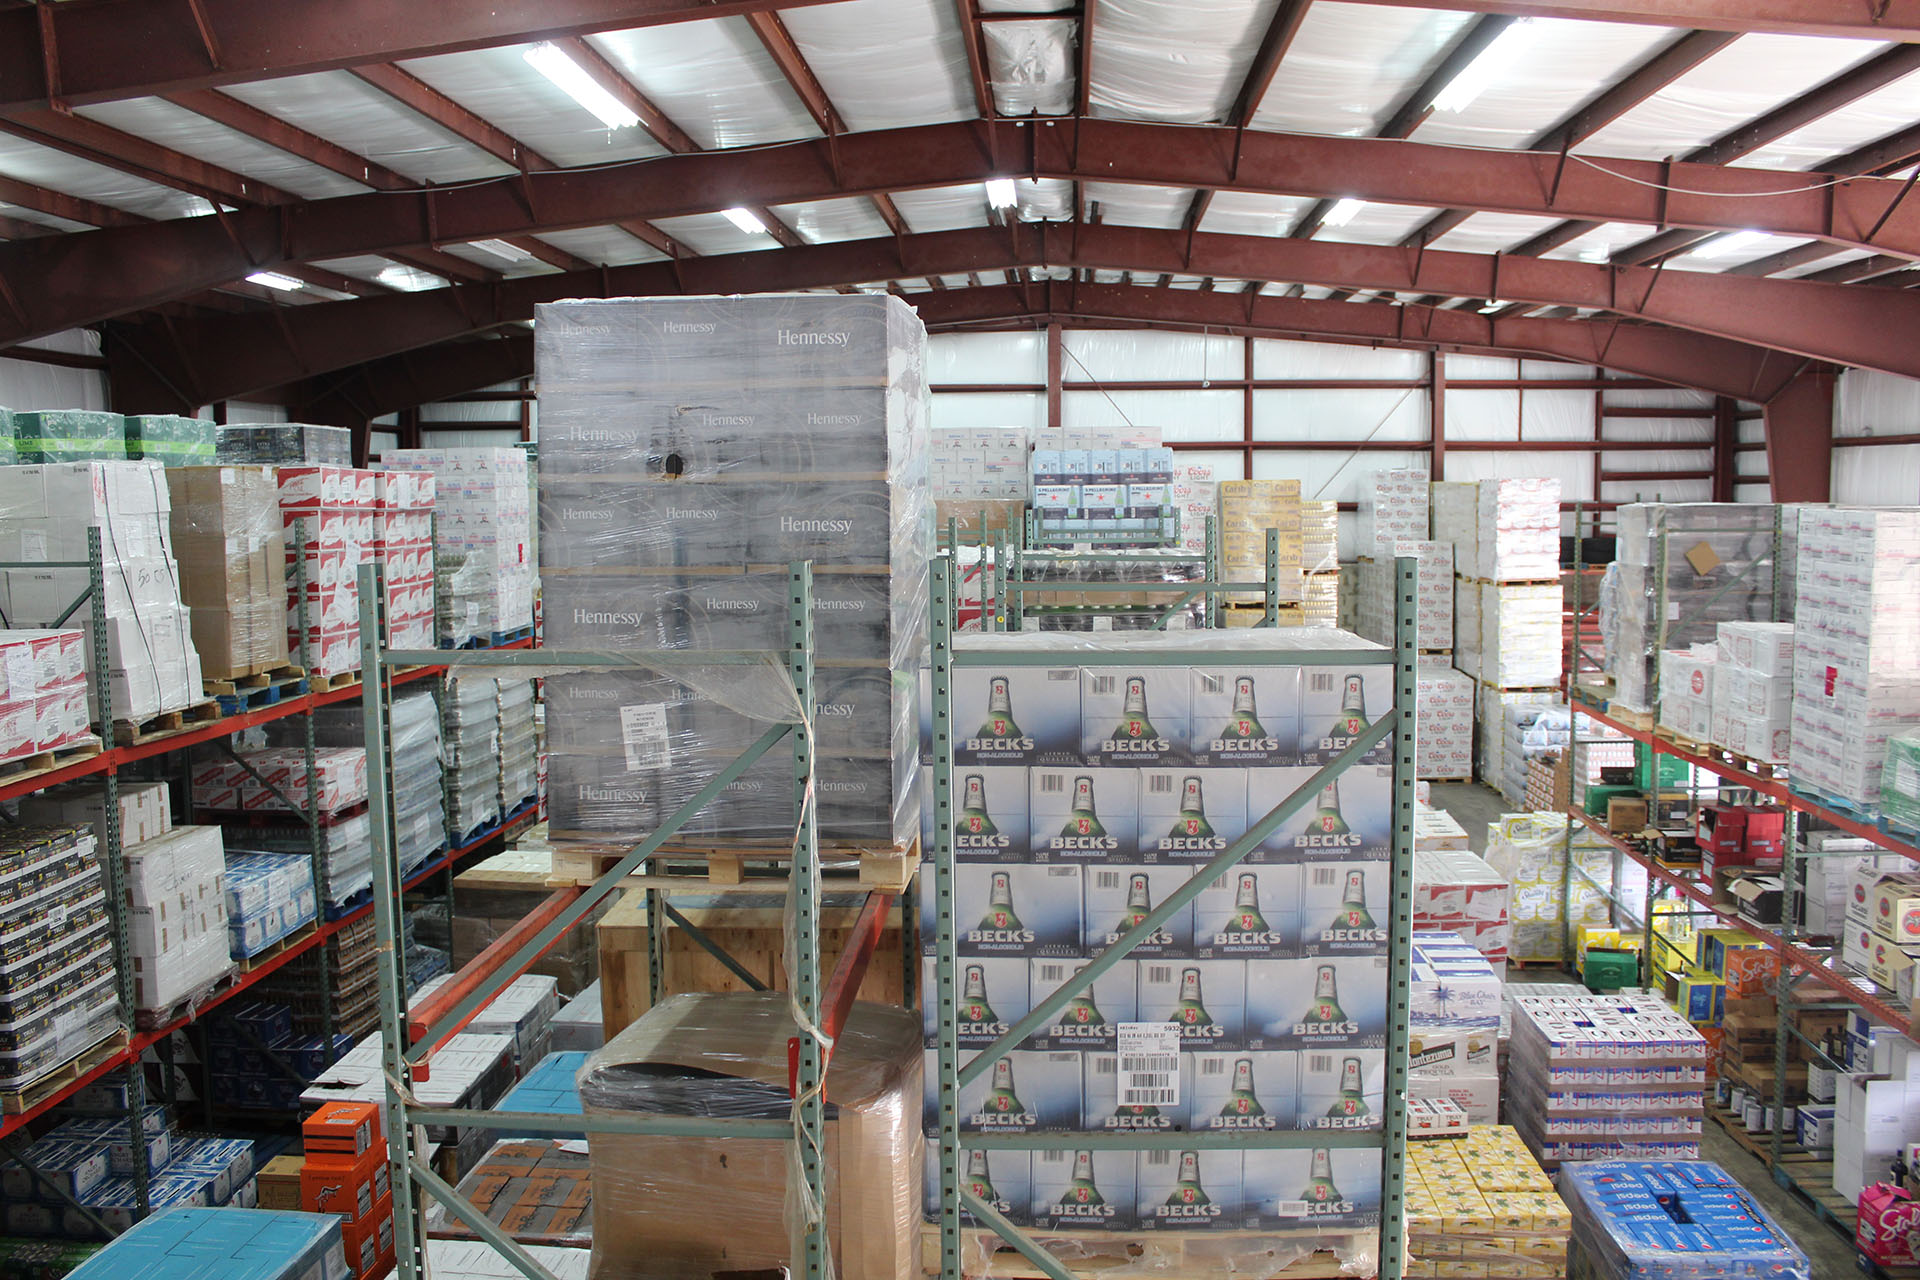 Pallet of products in warehouse